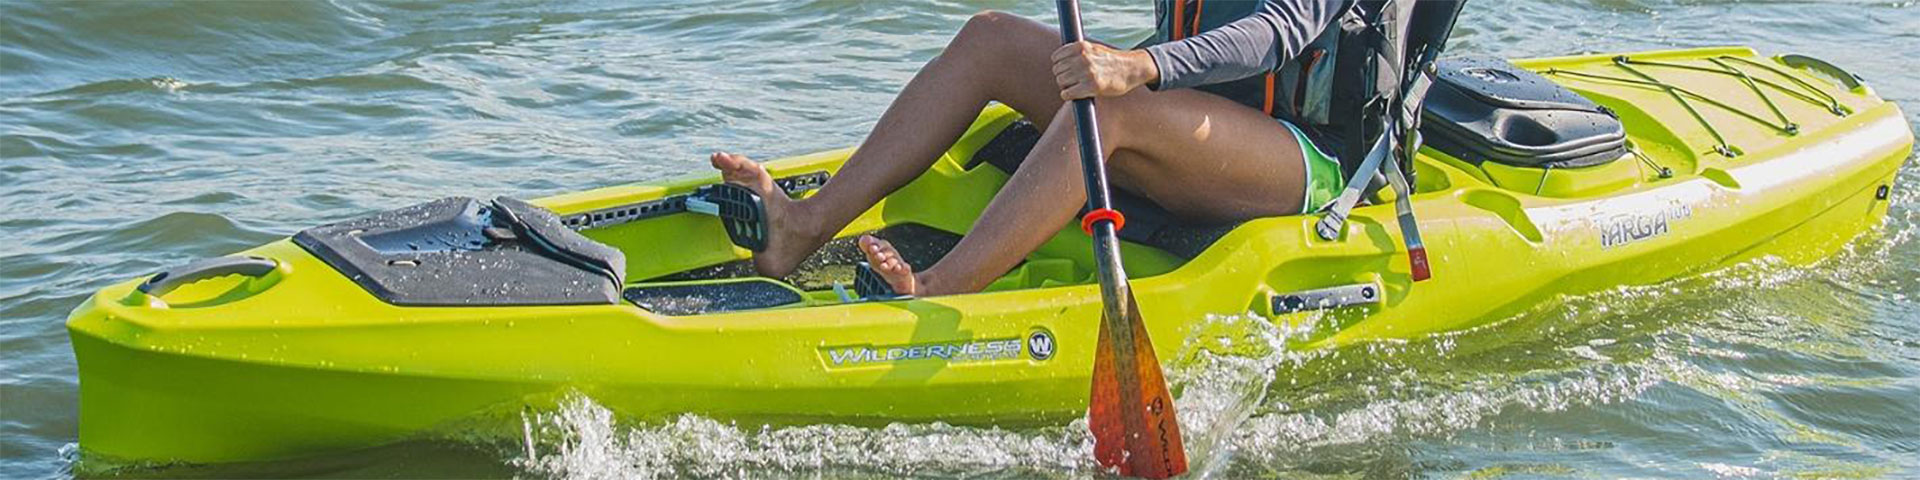 Person paddling a yellow Targa 100 kayak from Wilderness Systems